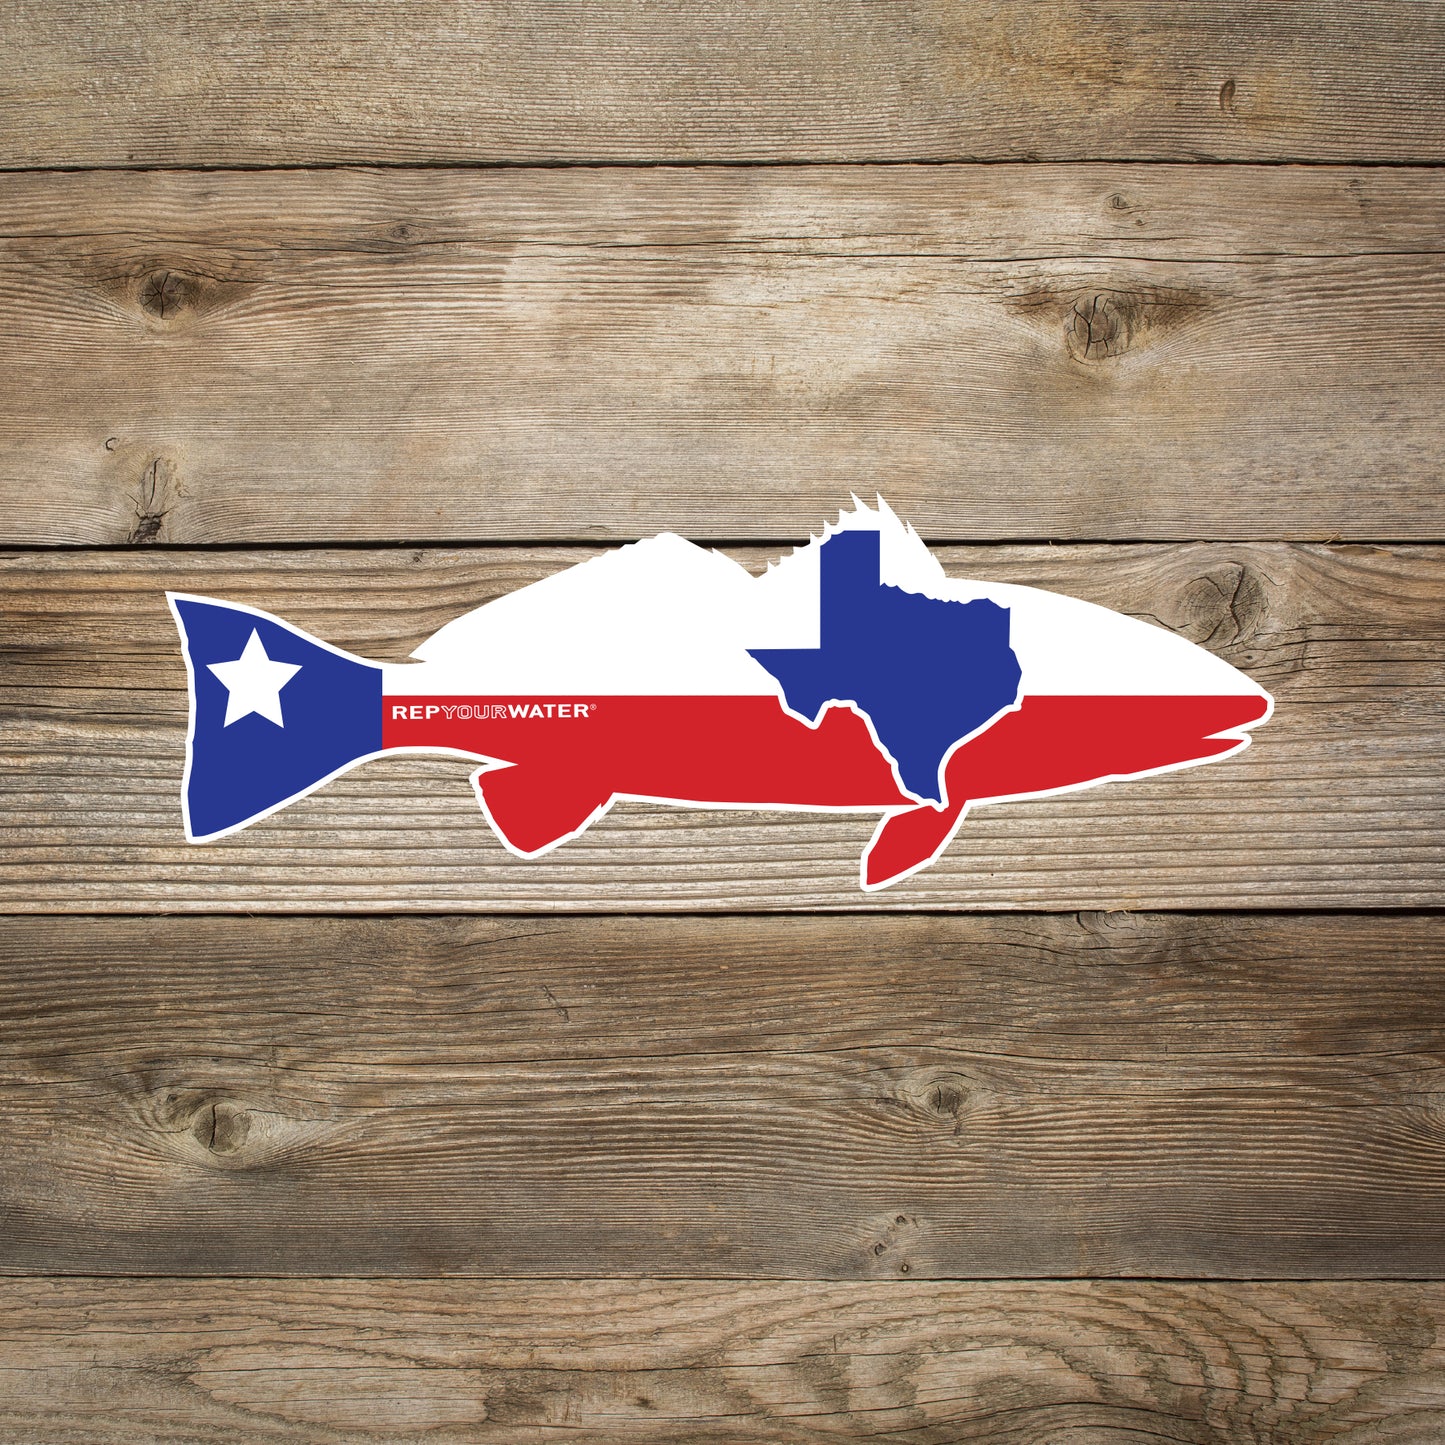 A wood background has a sticker in the shape of a redfish with the design and colors of the texas flag inside it as well as the state shape of texas. It also reads repyourwater